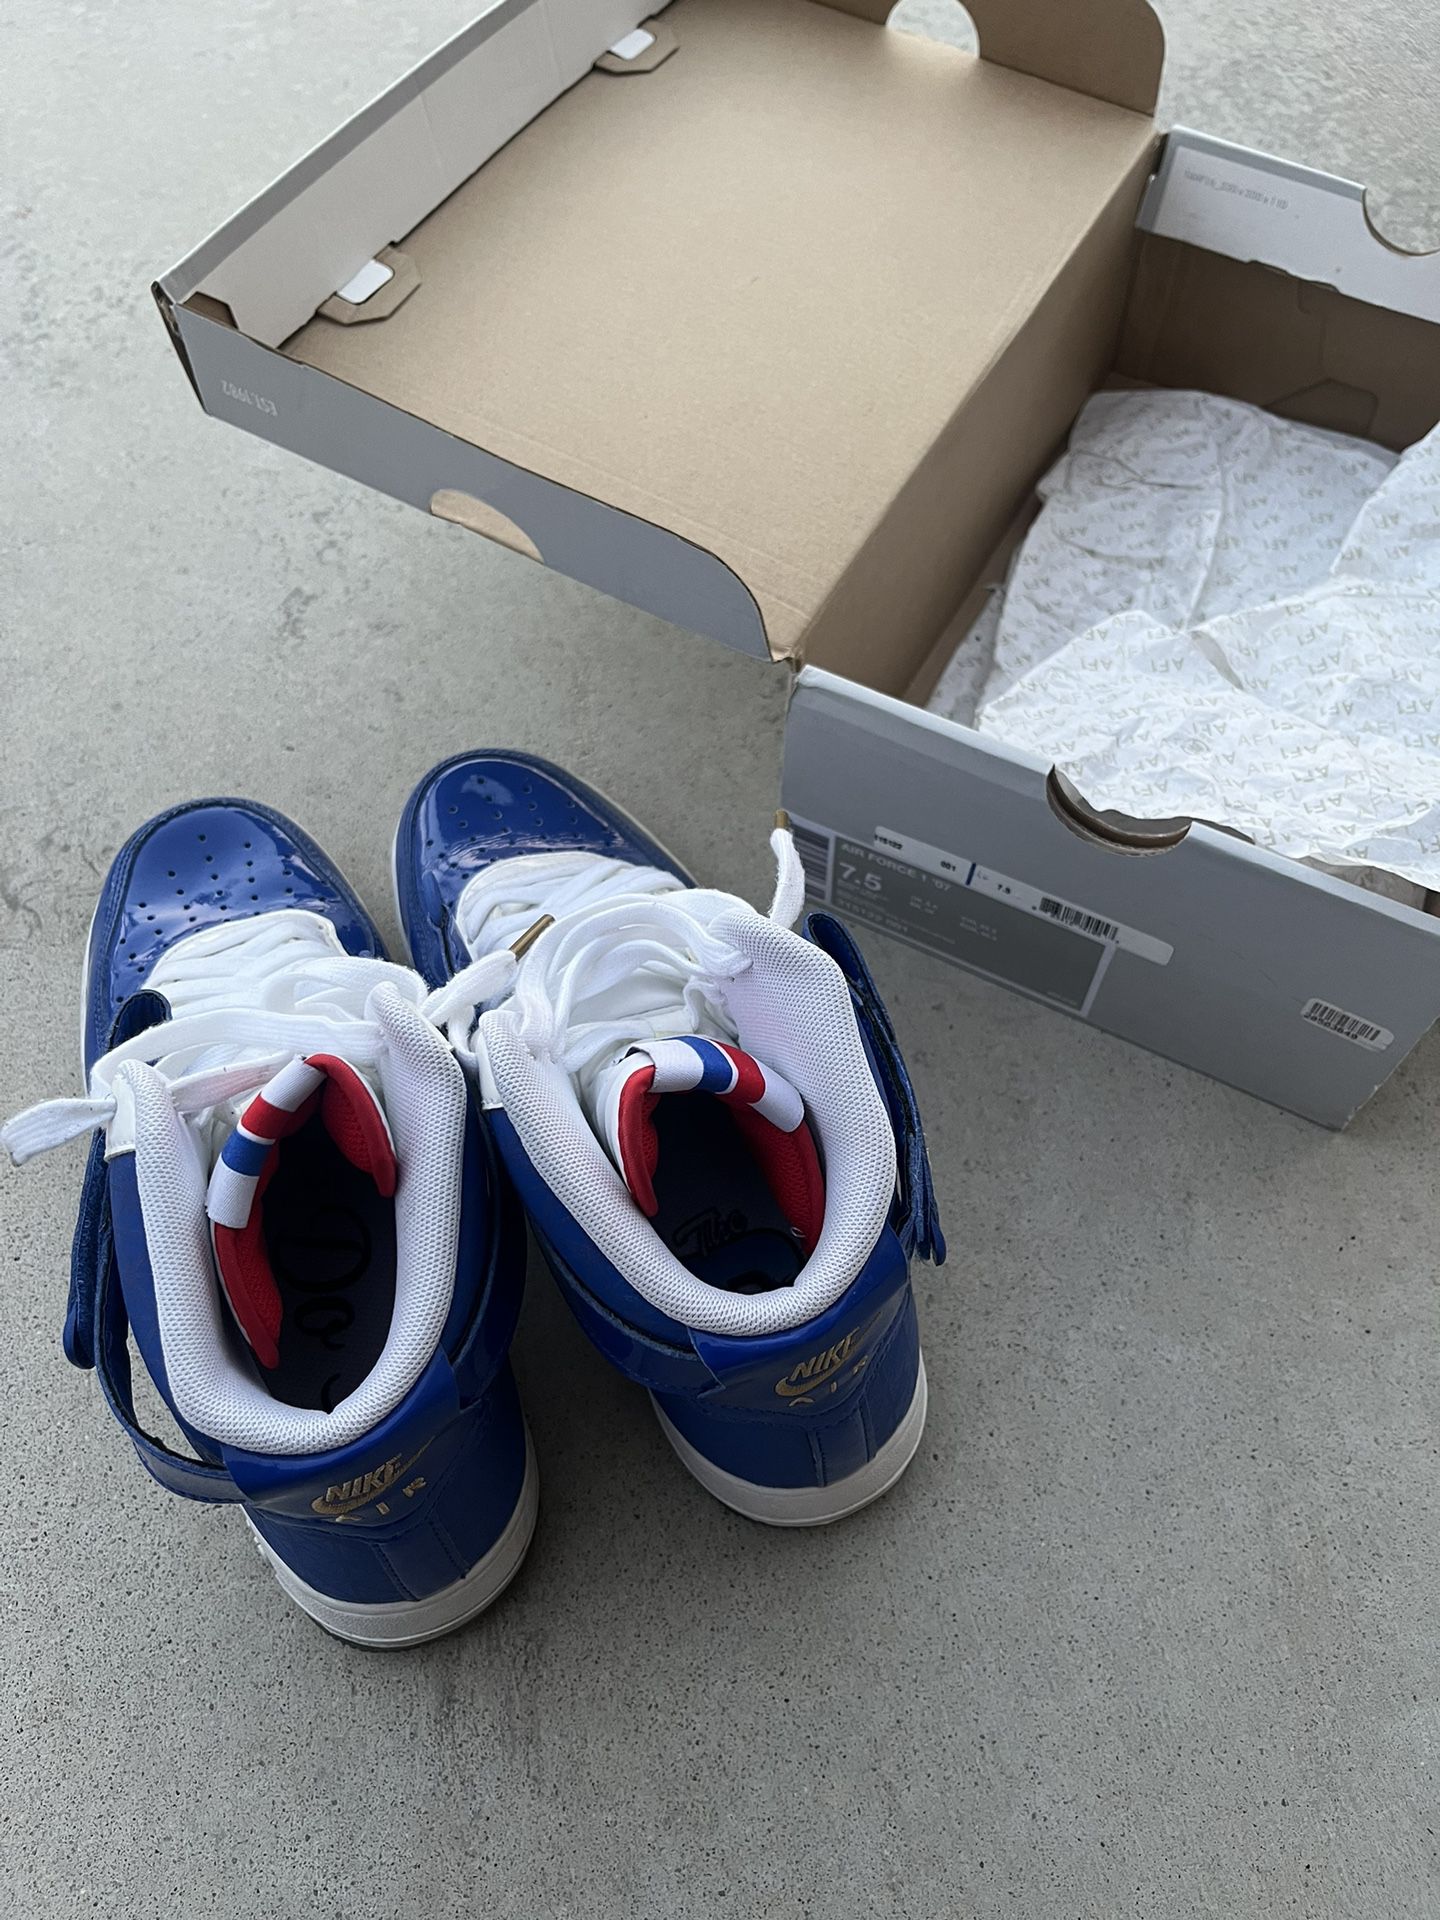 Detroit Pistons “Nike Shoes for Life” Giveaway